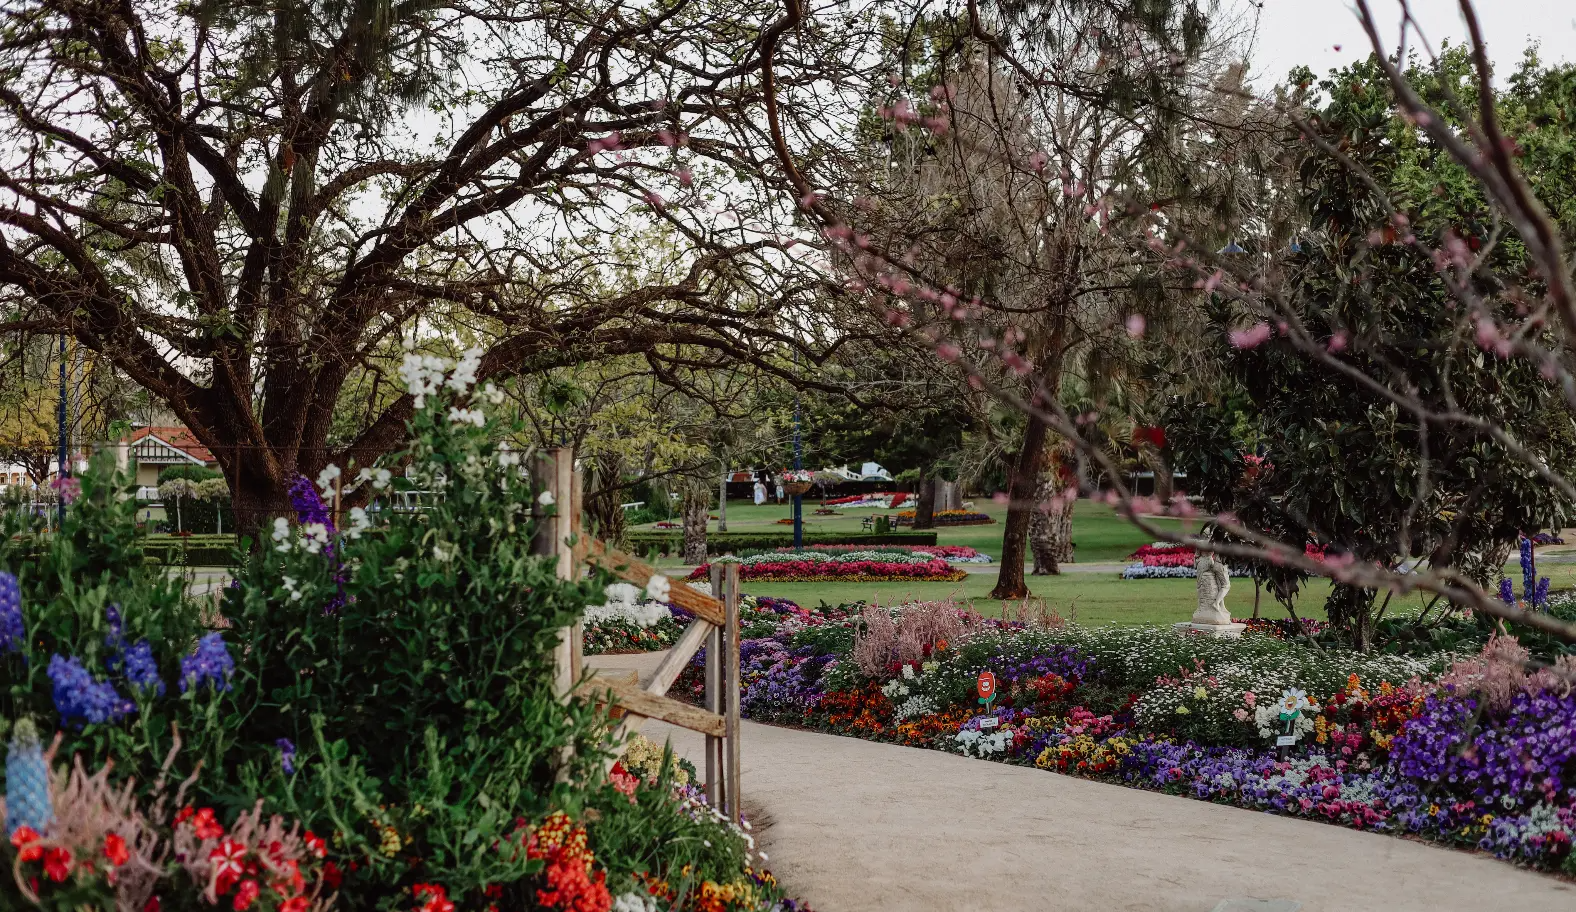 A serene garden scene featuring a path lined with colorful flowers, including red, purple, and white blooms. Mature trees with budding leaves and branches arch over the walkway. In the distance, people can be seen enjoying the scenic green space.